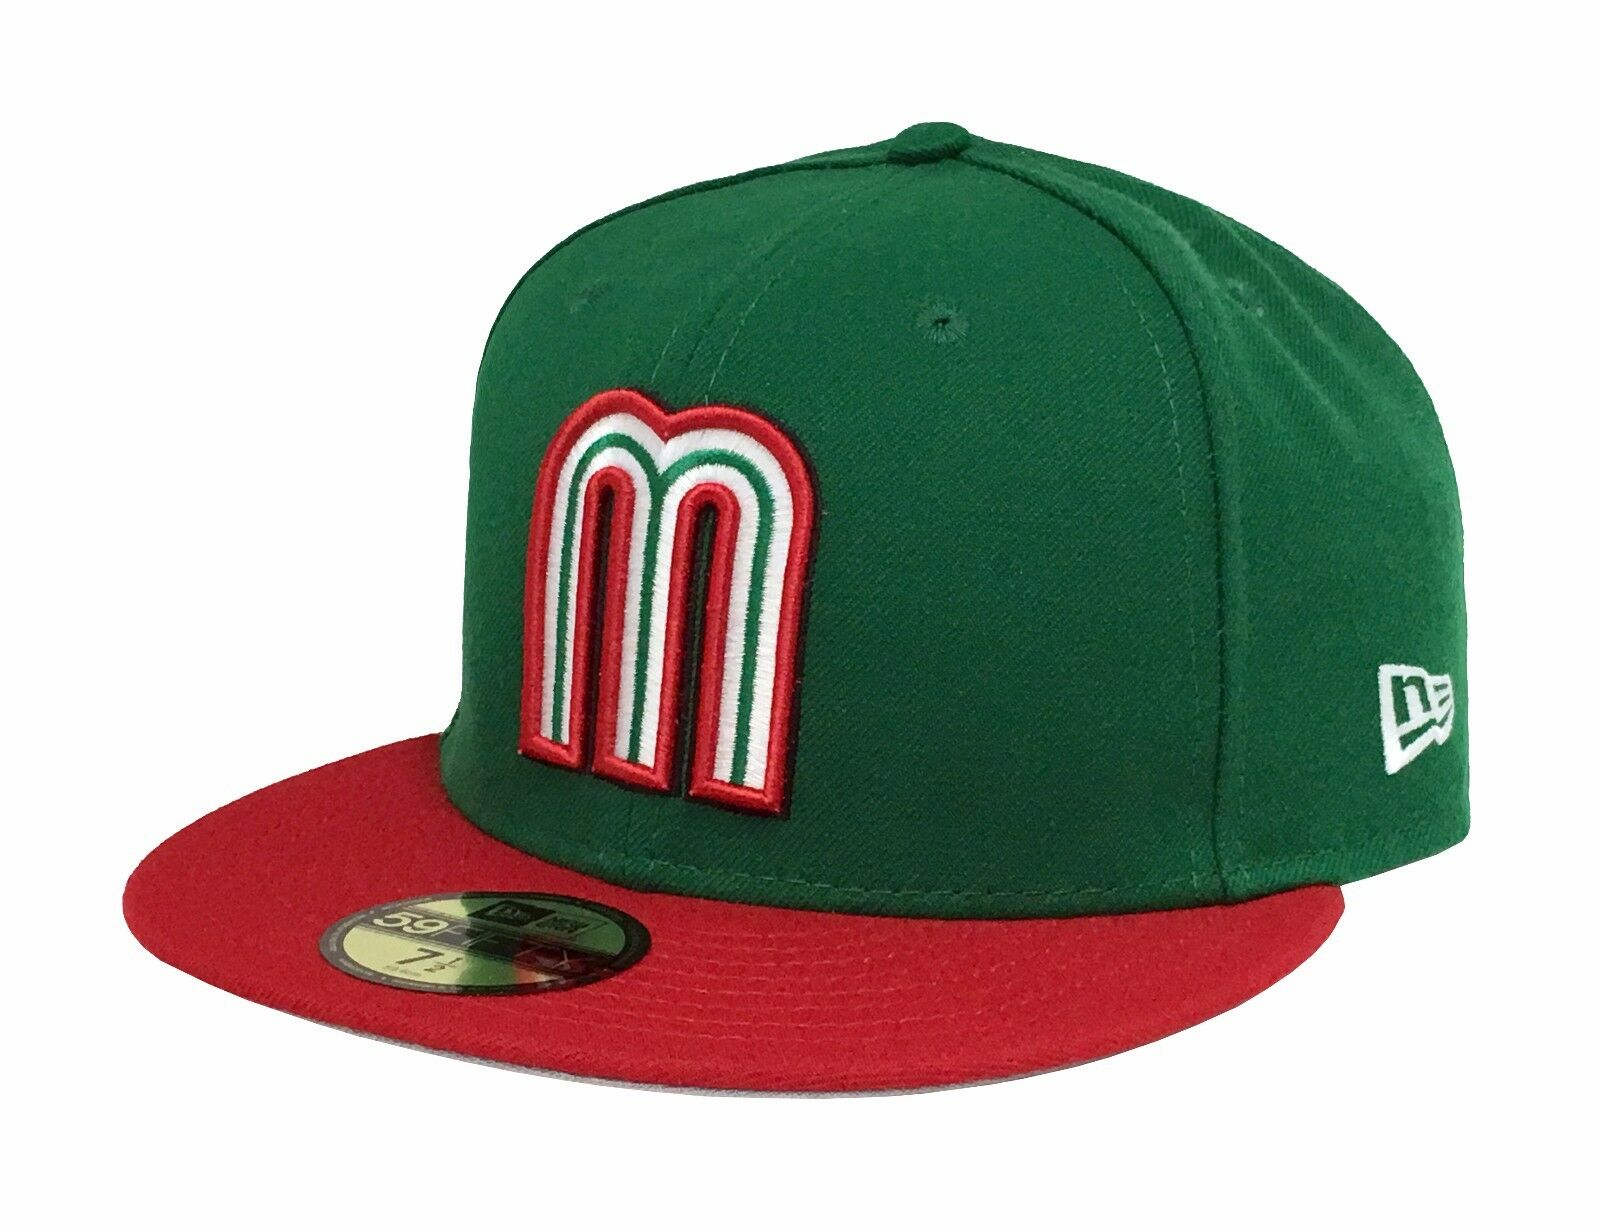 New Era 59fifty Cap Mexico World Baseball Classic Fitted Hat Green Red